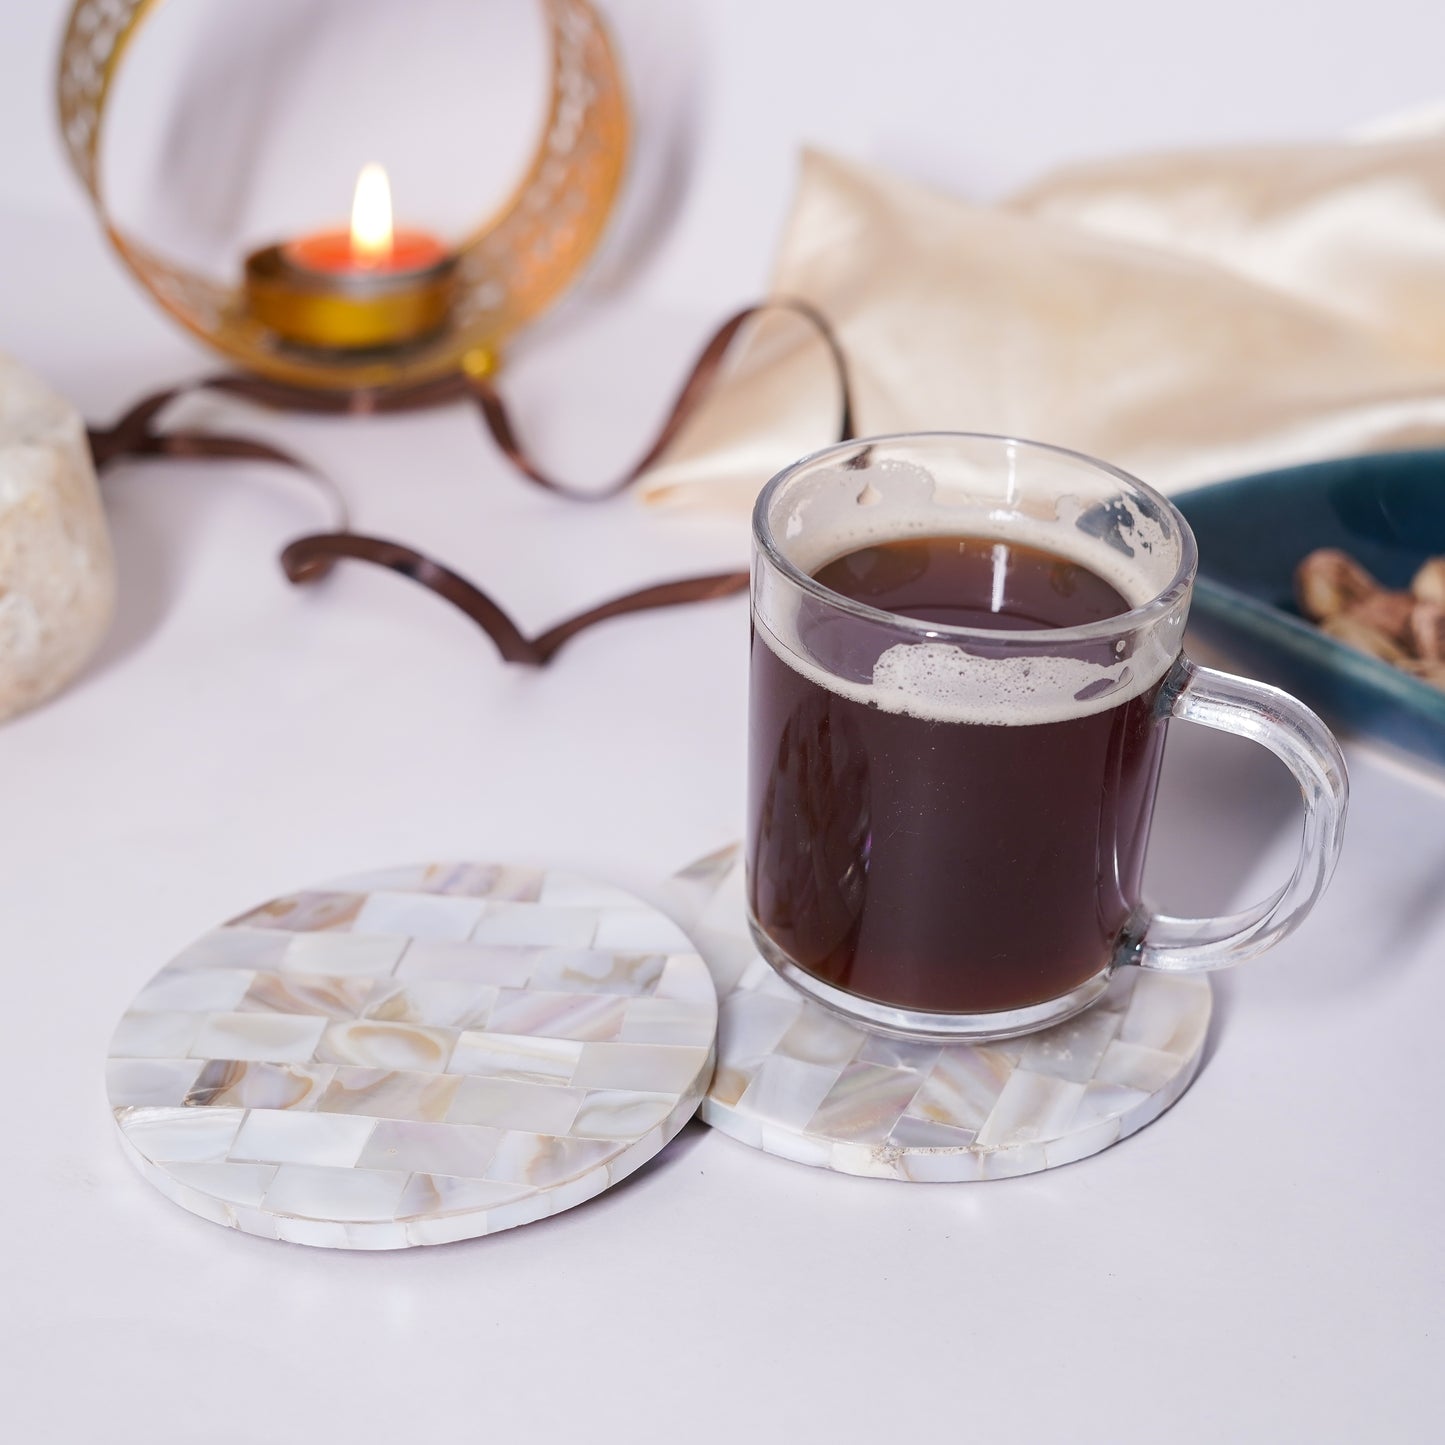 Mother of Pearl Coaster Set of 2 for Tea Coffee Cocktail Handmade MOP Coaster for Hot & Cold Drinks Coaster for Dining Table Home and Office Round- Off White